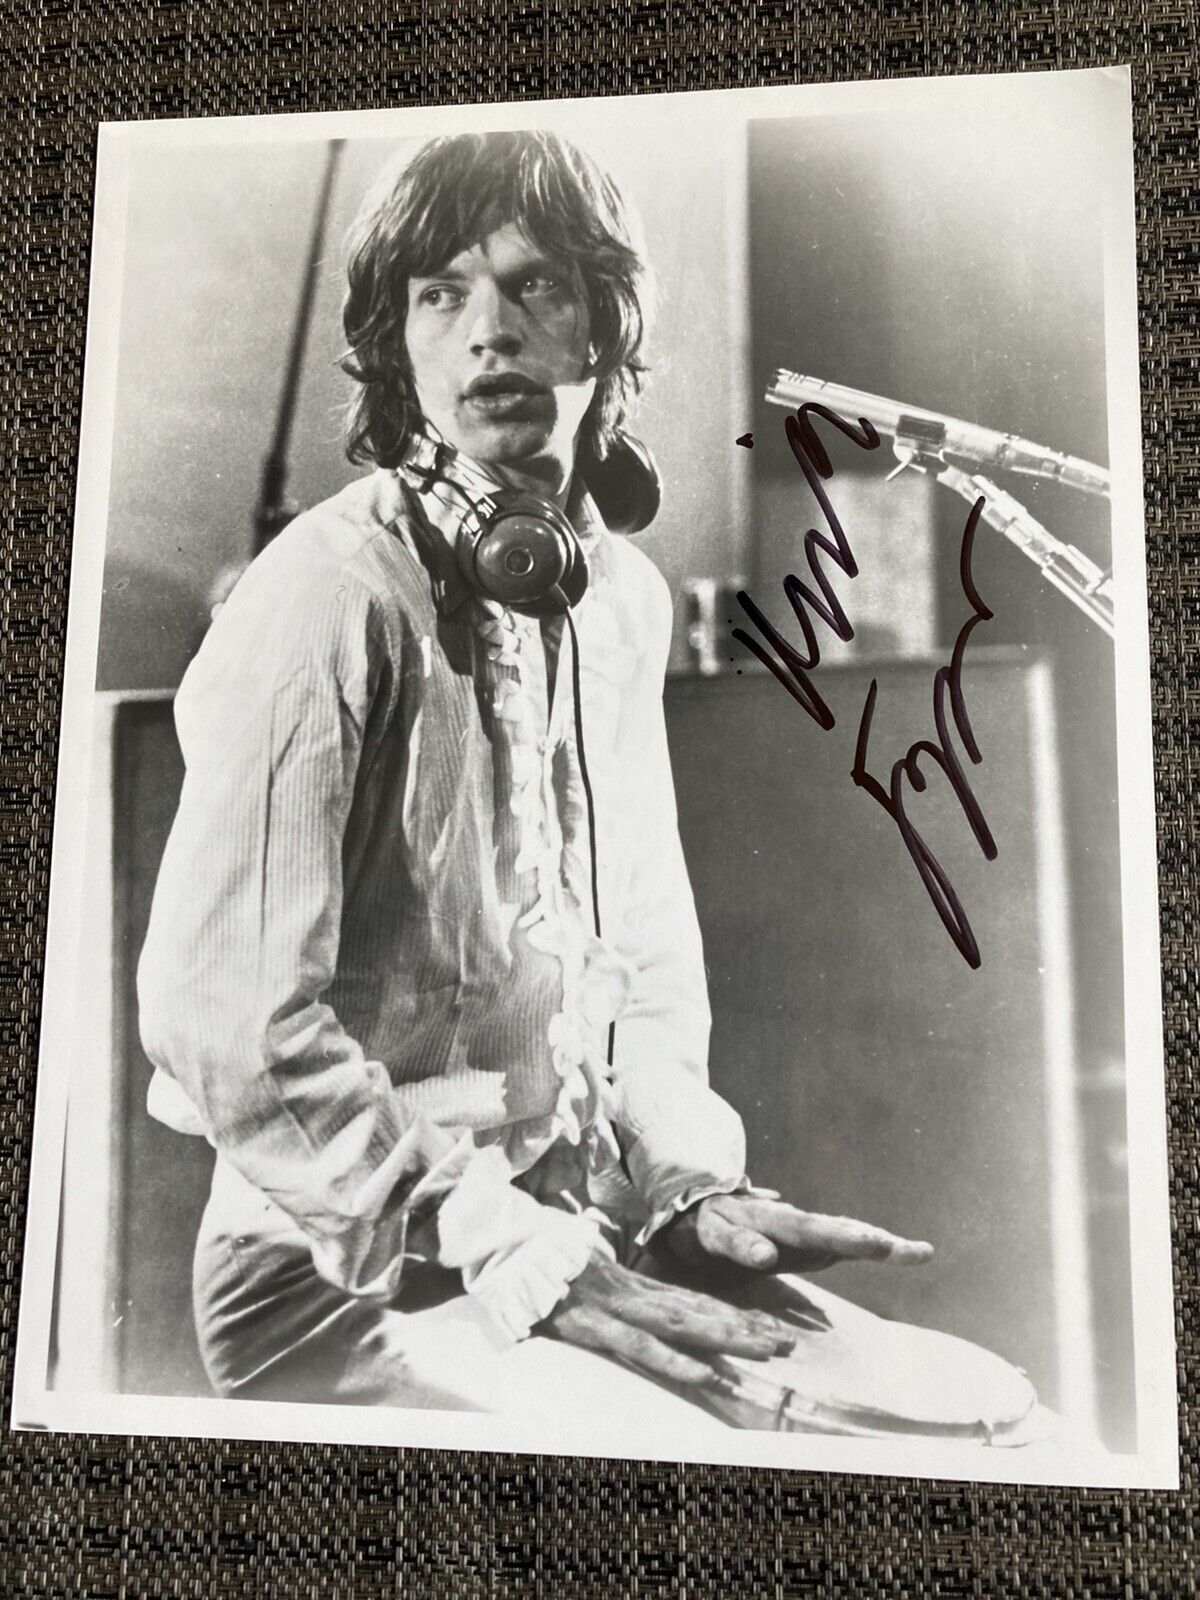 Mick Jagger (the Rolling Stones) Signed/ Autographed 8x10 Photo .Rare